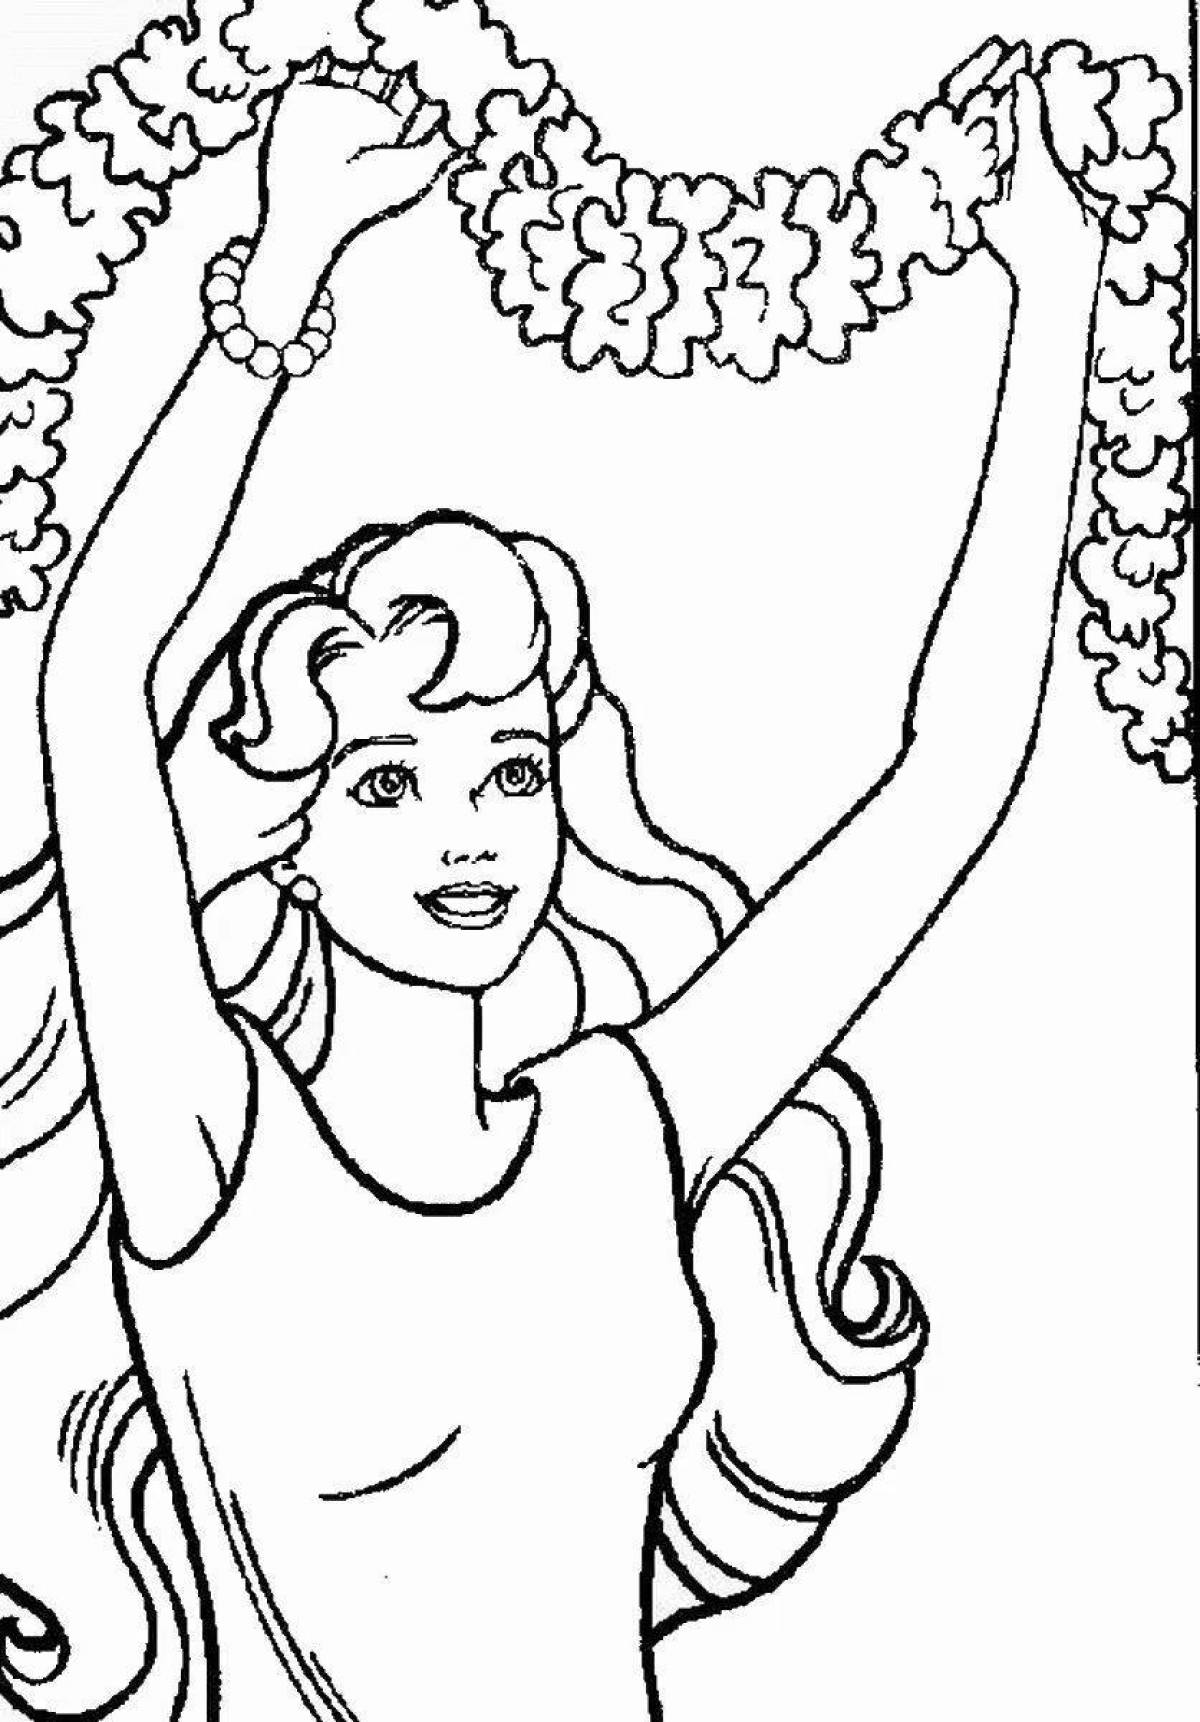 Joyful coloring book from the 90s